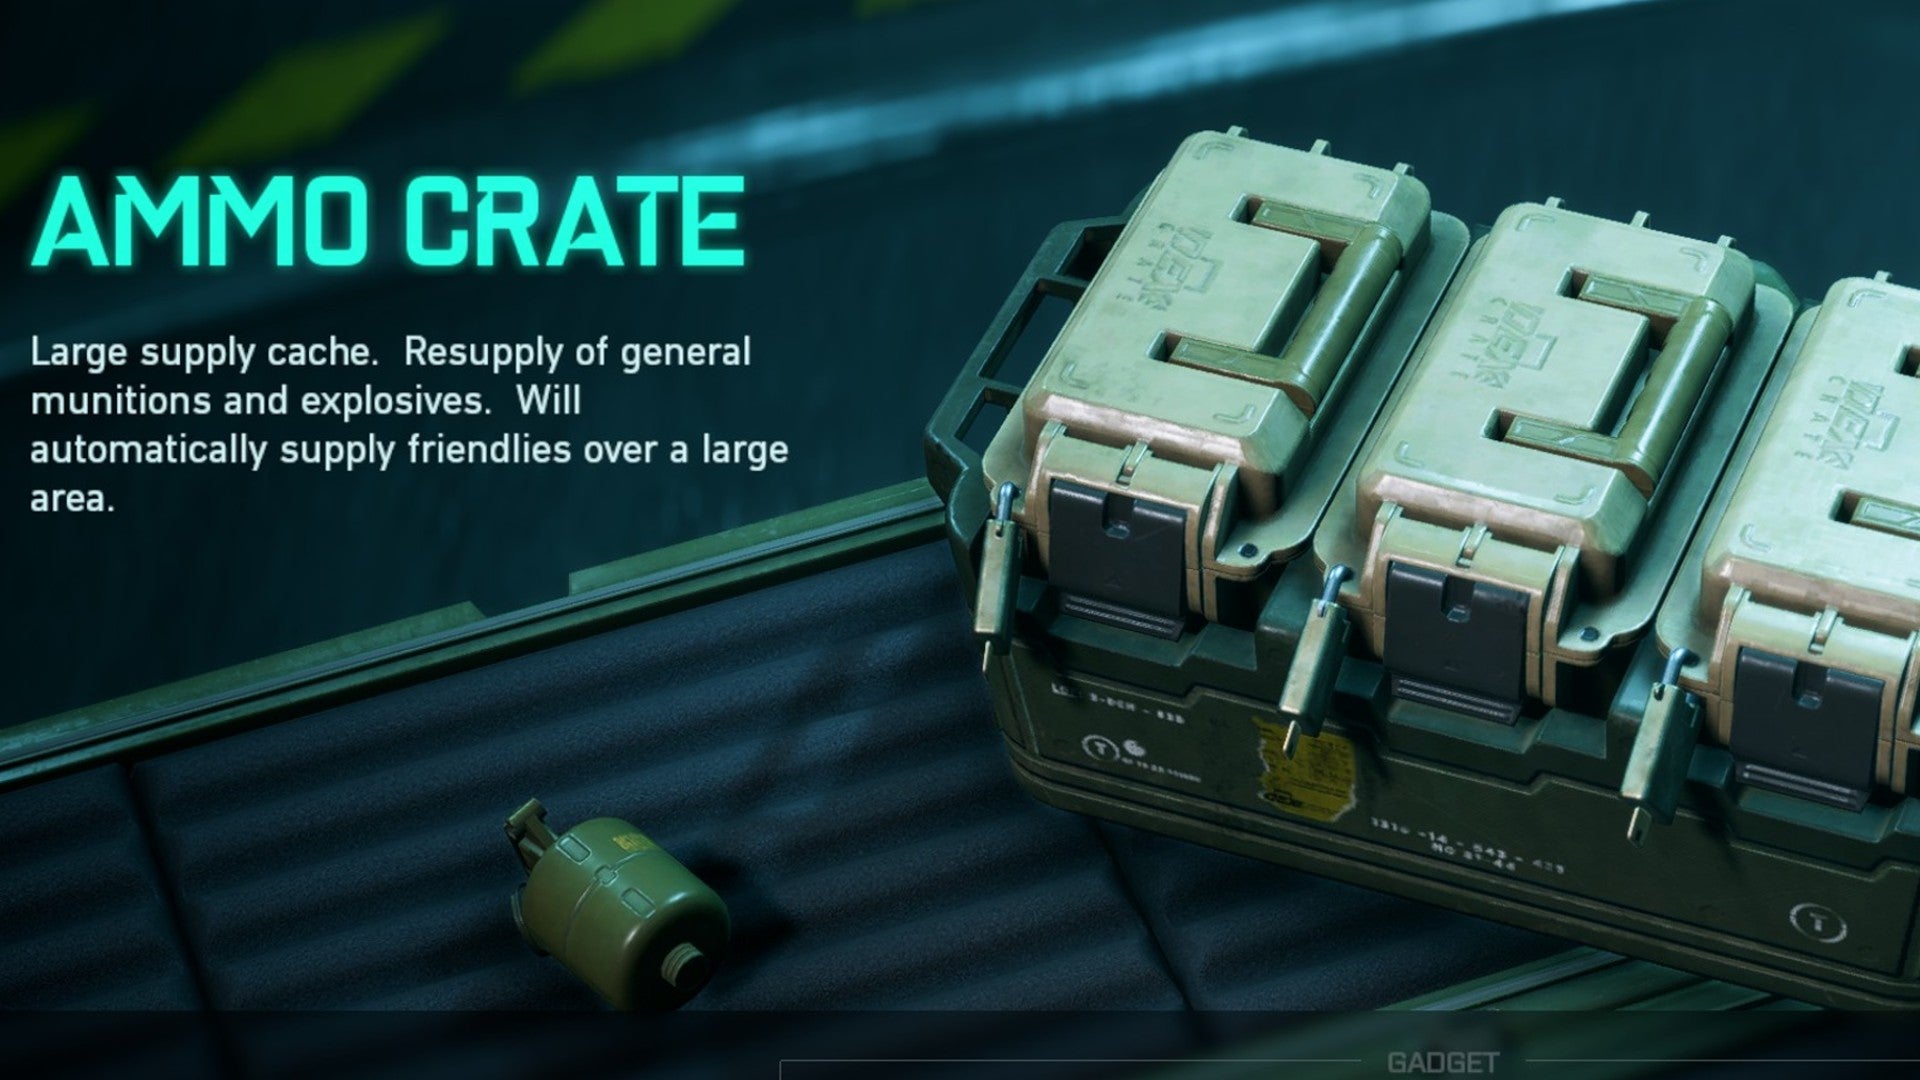 Ammo Crate pictured with some descriptive text in Battlefield 2042 loadout menu.